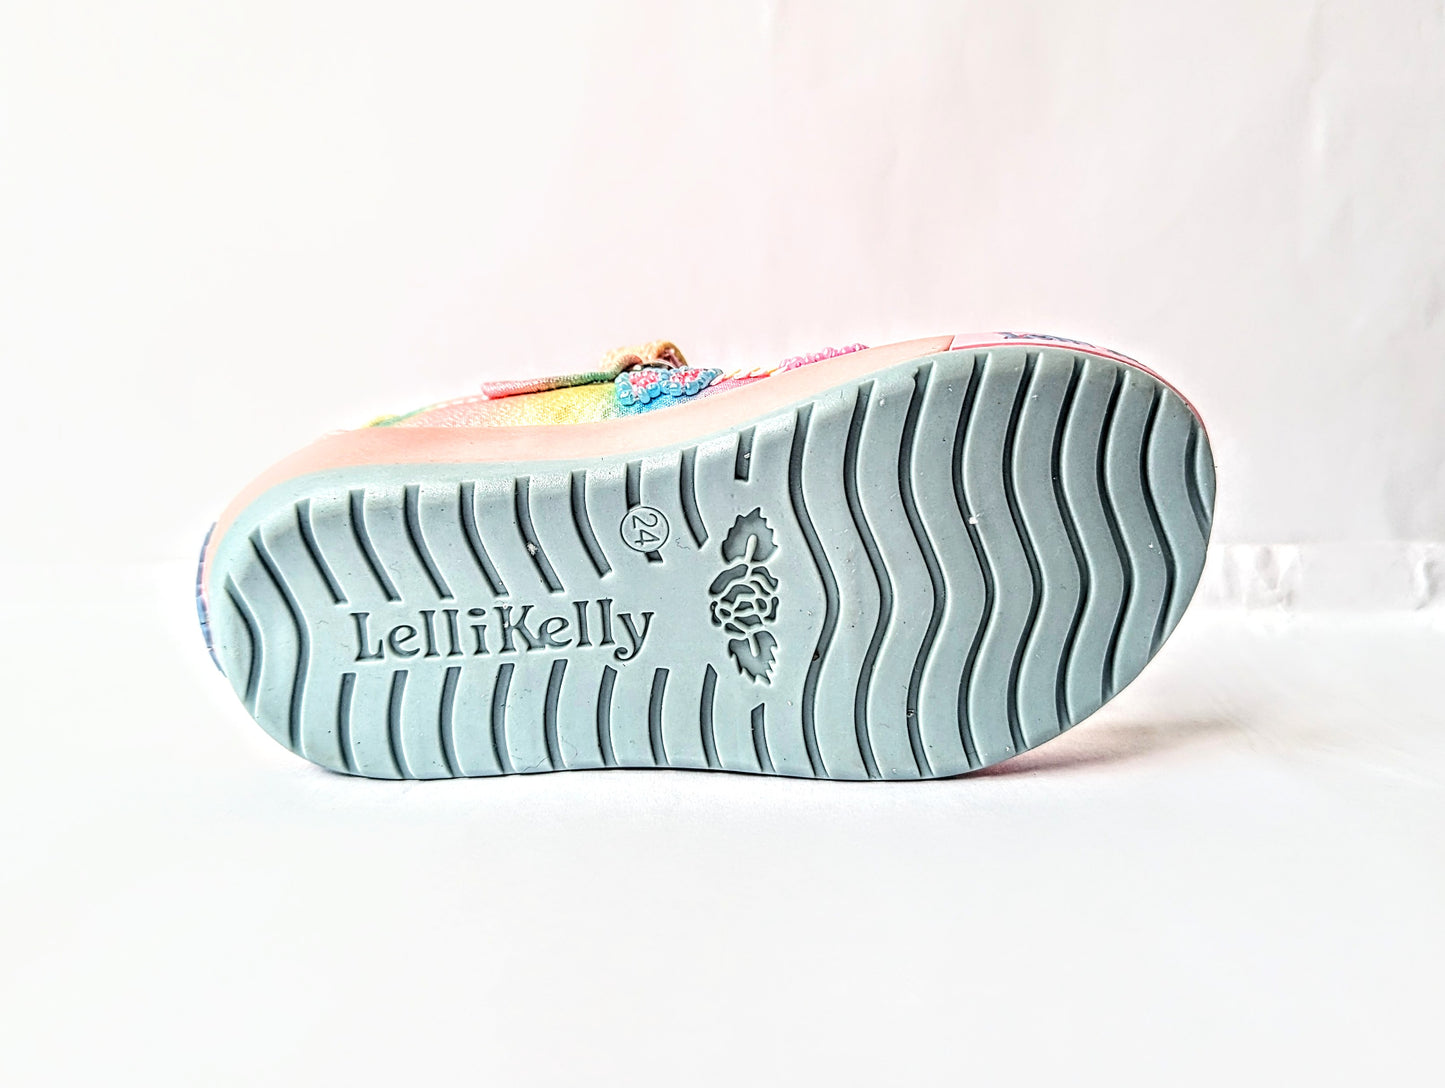 A girls Mary Jane shoe by Lelli Kelly, style LKED3463 Myla, in multi coloured canvas with sequin and bead embellishments and velcro fastening. View of sole showing Lelli Kelly branding.